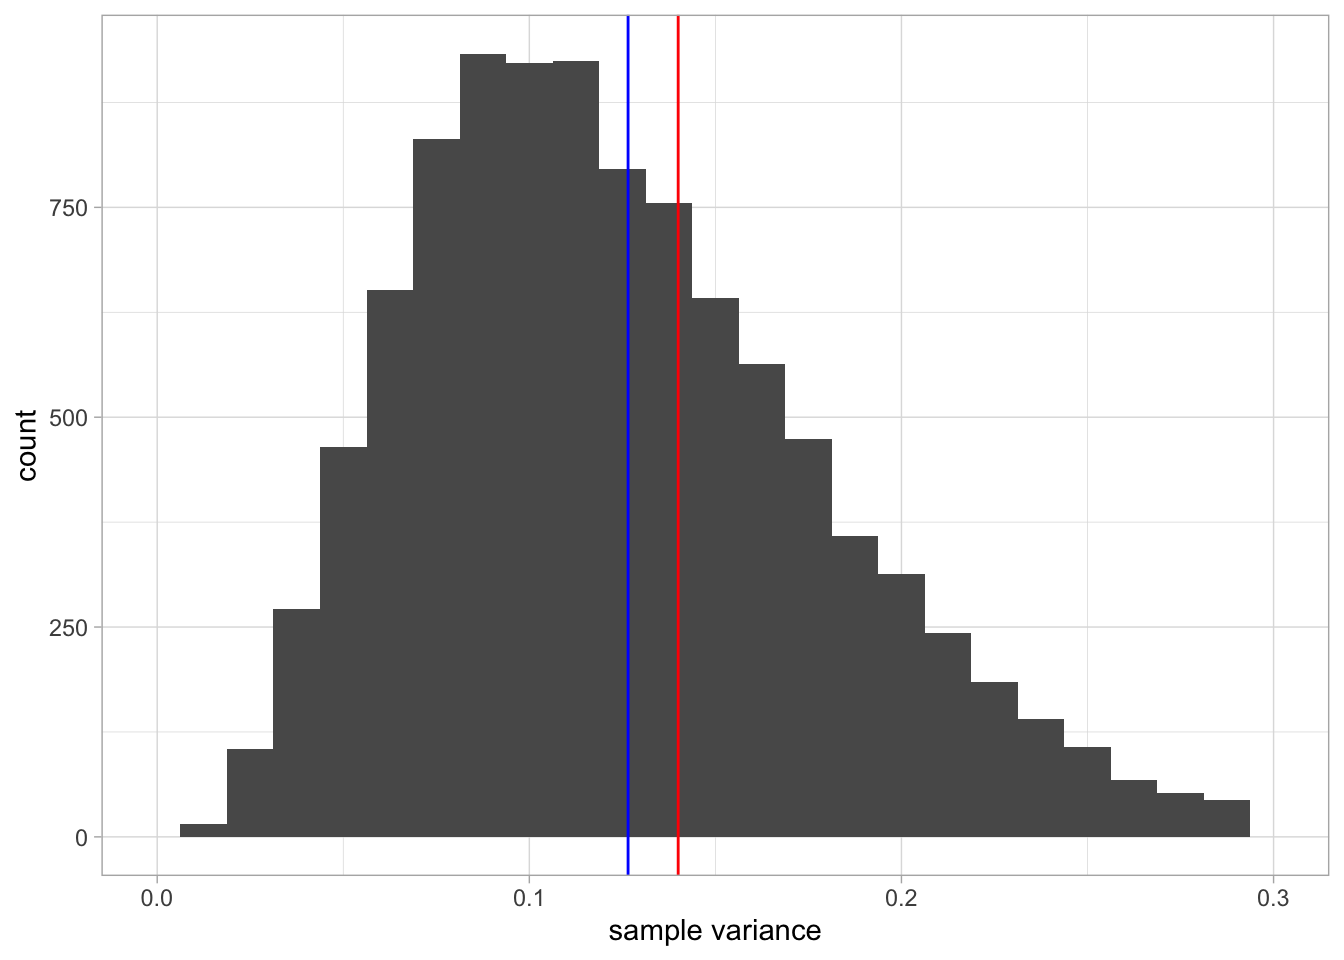 A histogram of 10,000 sample variances when the sample size equals 10. The red line indicates the population variance. The blue line indicates the mean of all variances observed in the 10,000 samples.